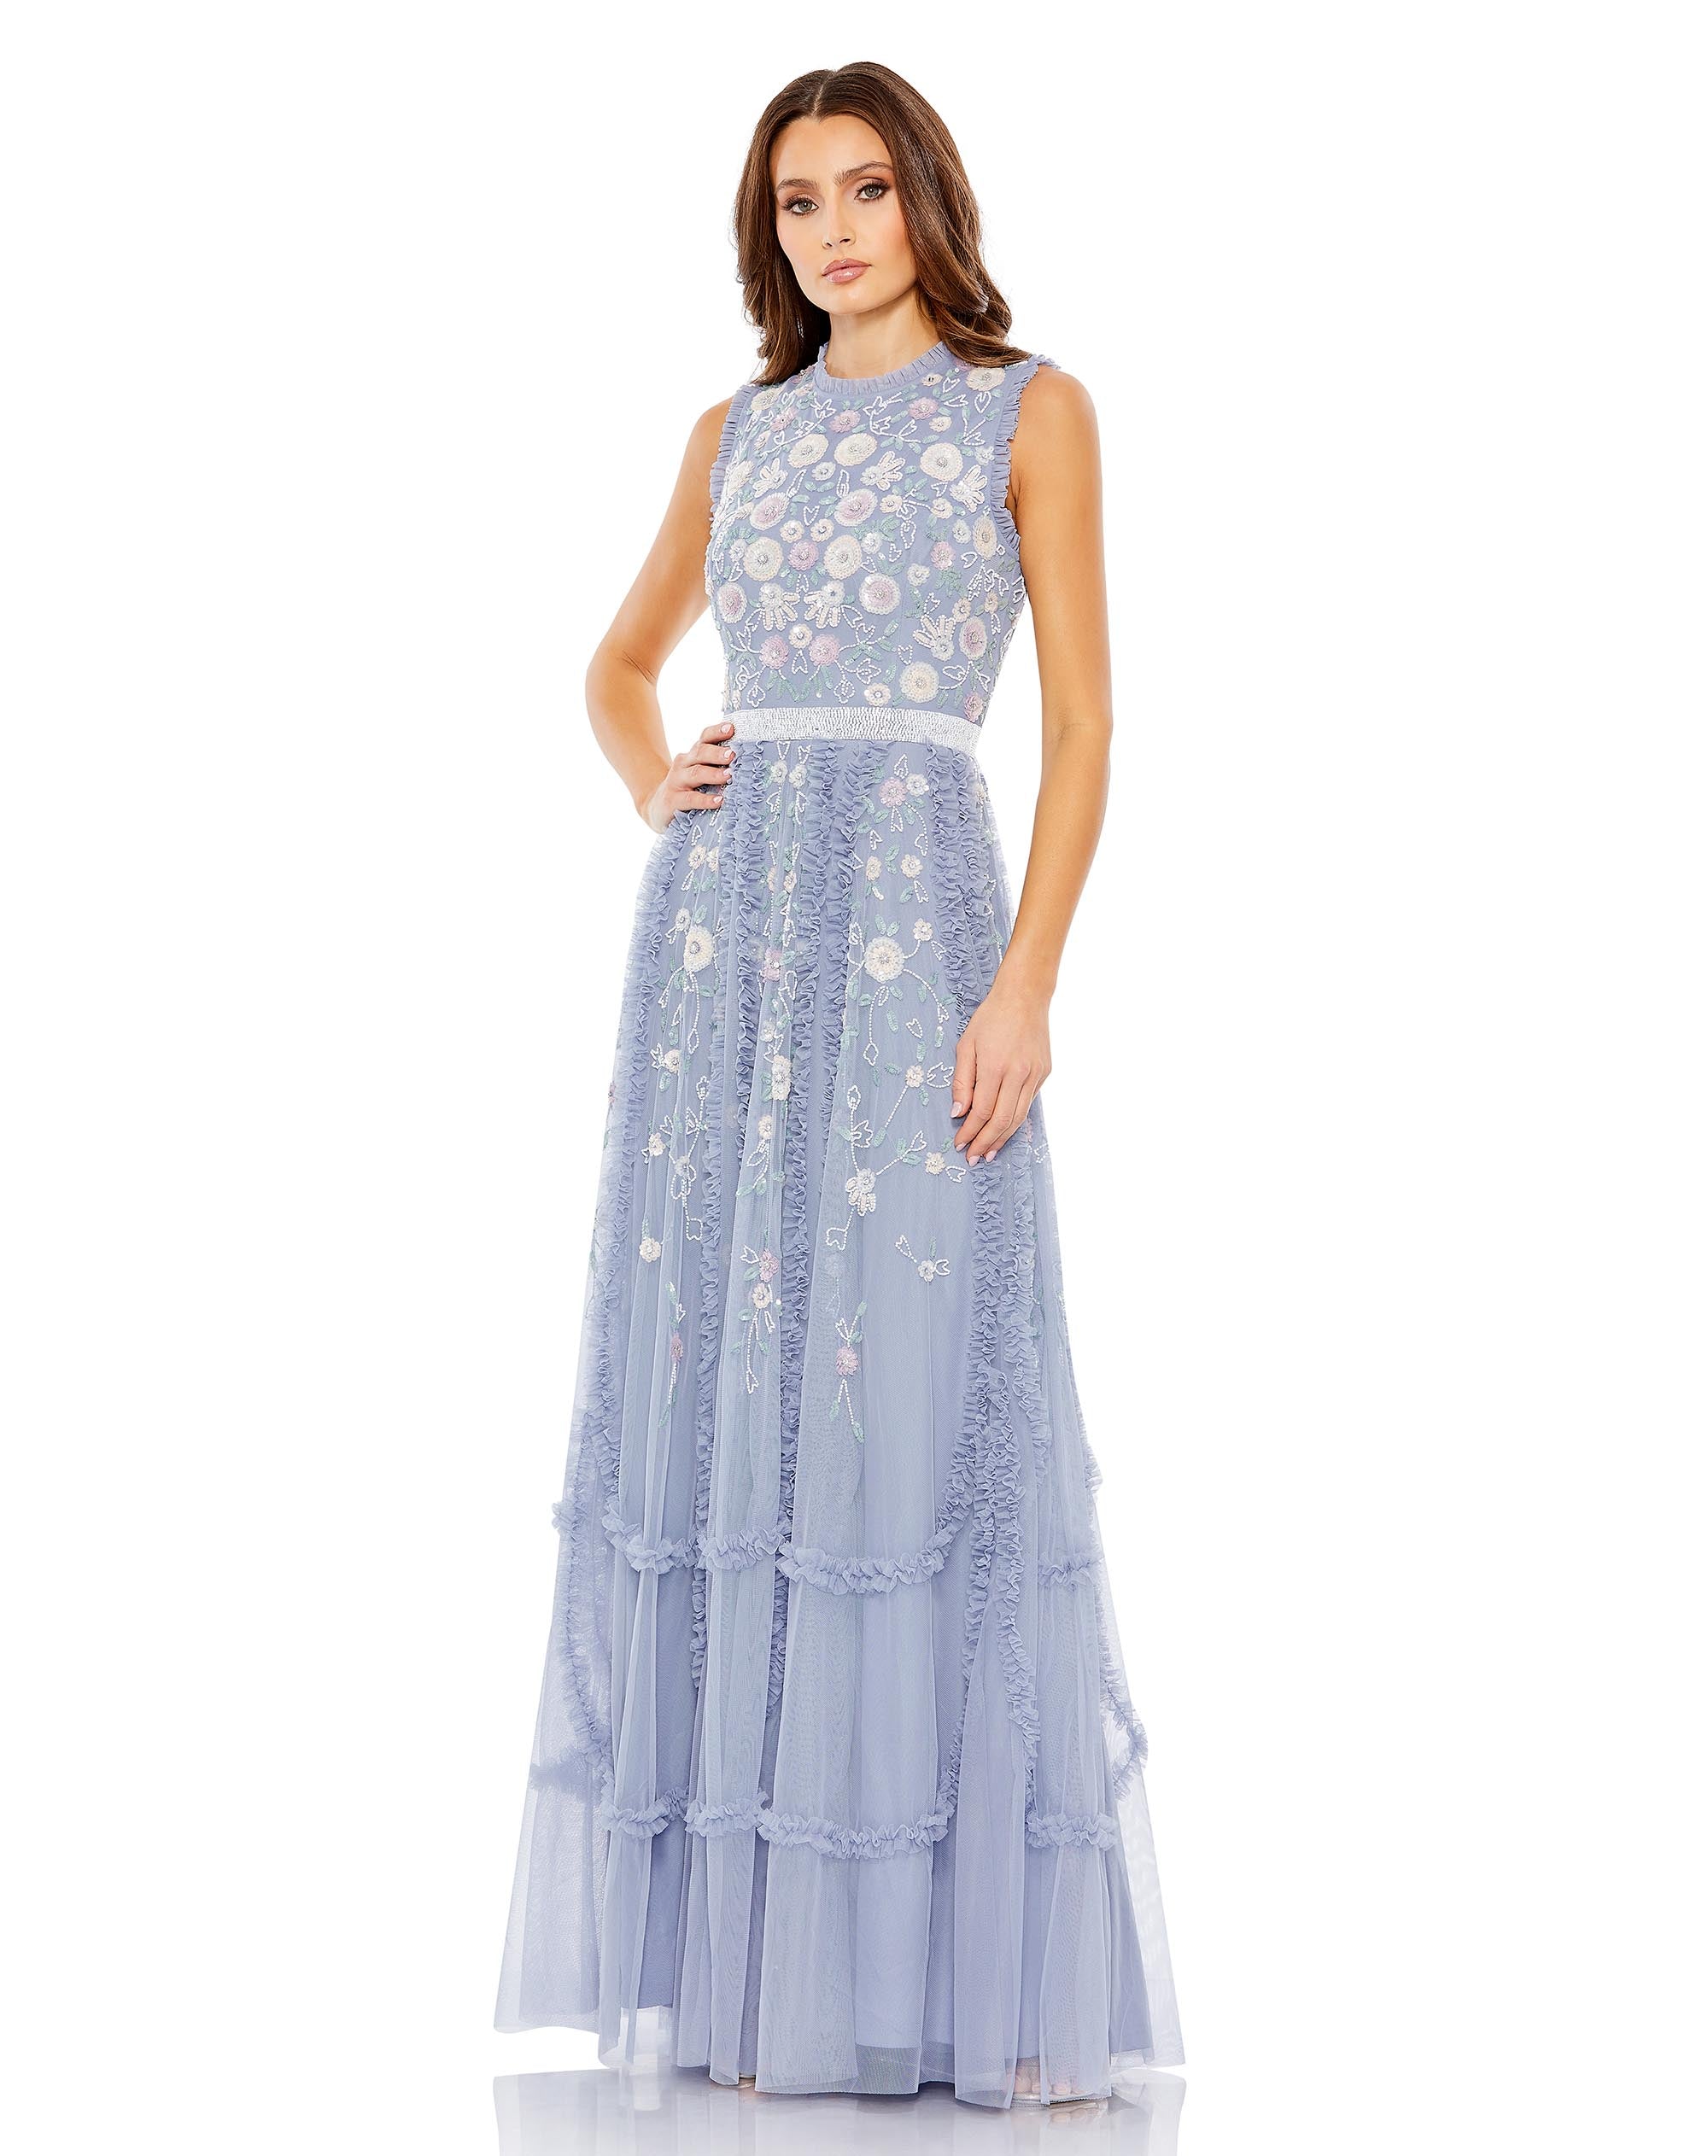 Embroidered High Neck Sleeveless Ruffled Gown - FINAL SALE